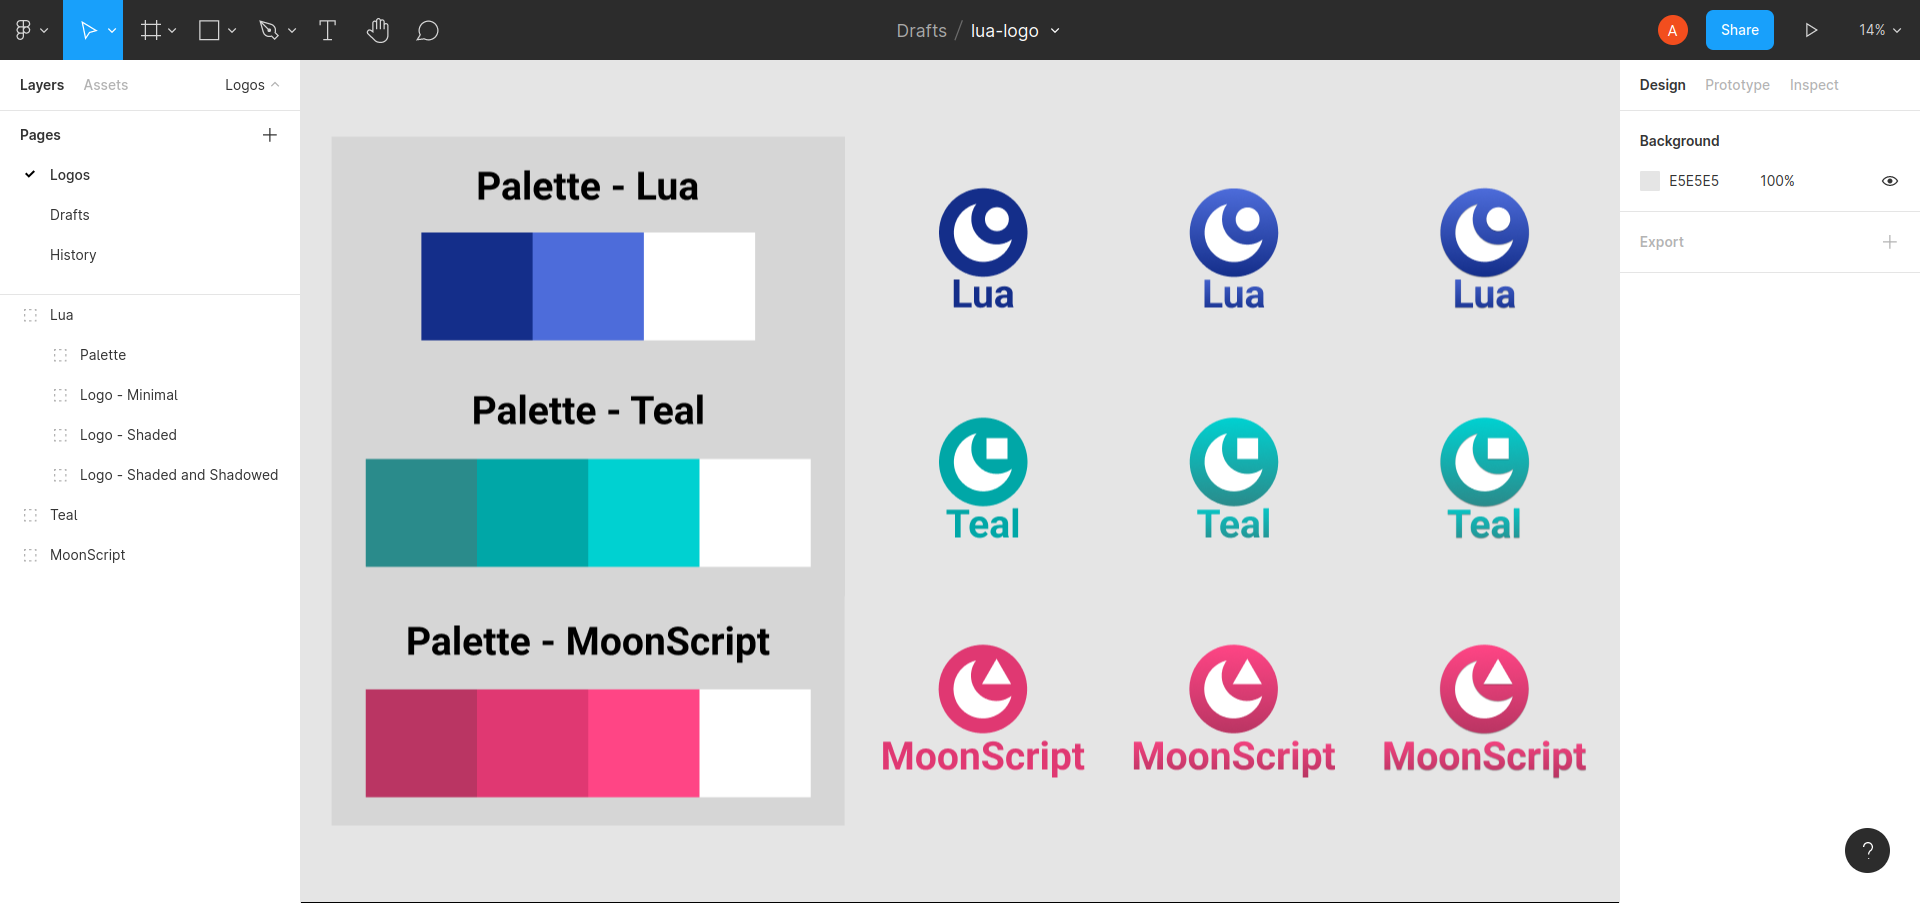 Other lua language flavor logos (Style 1)